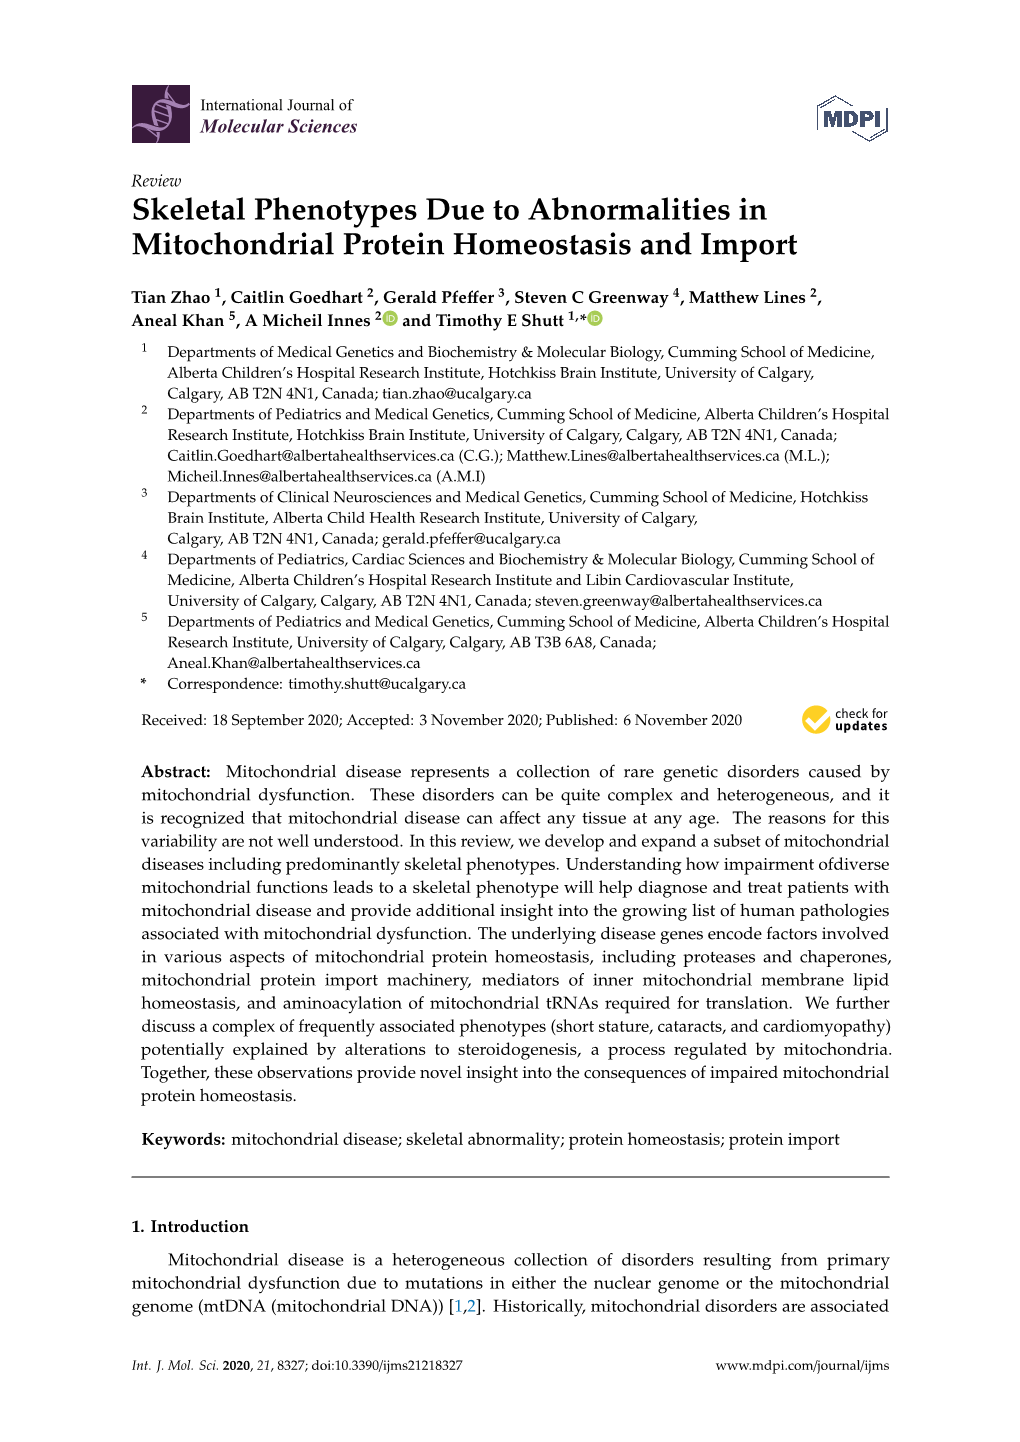 Skeletal Phenotypes Due to Abnormalities in Mitochondrial Protein Homeostasis and Import